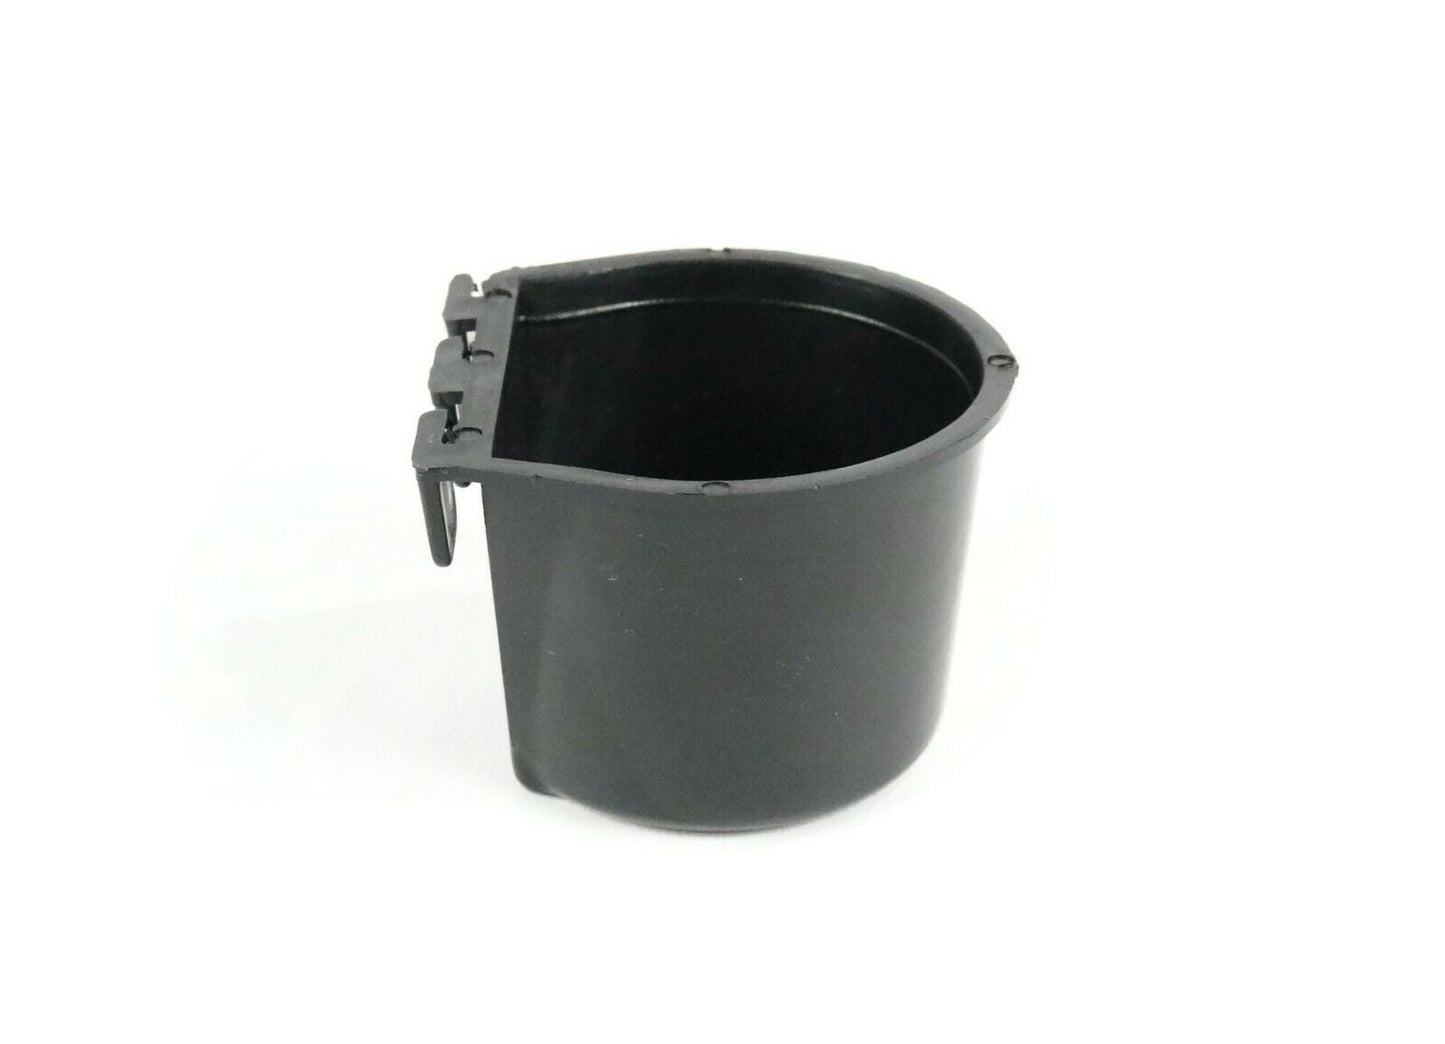 The ROP Shop | Black Cage Bowl for Farm Animals & Pets Food & Water Made of Heavy Duty Plastic